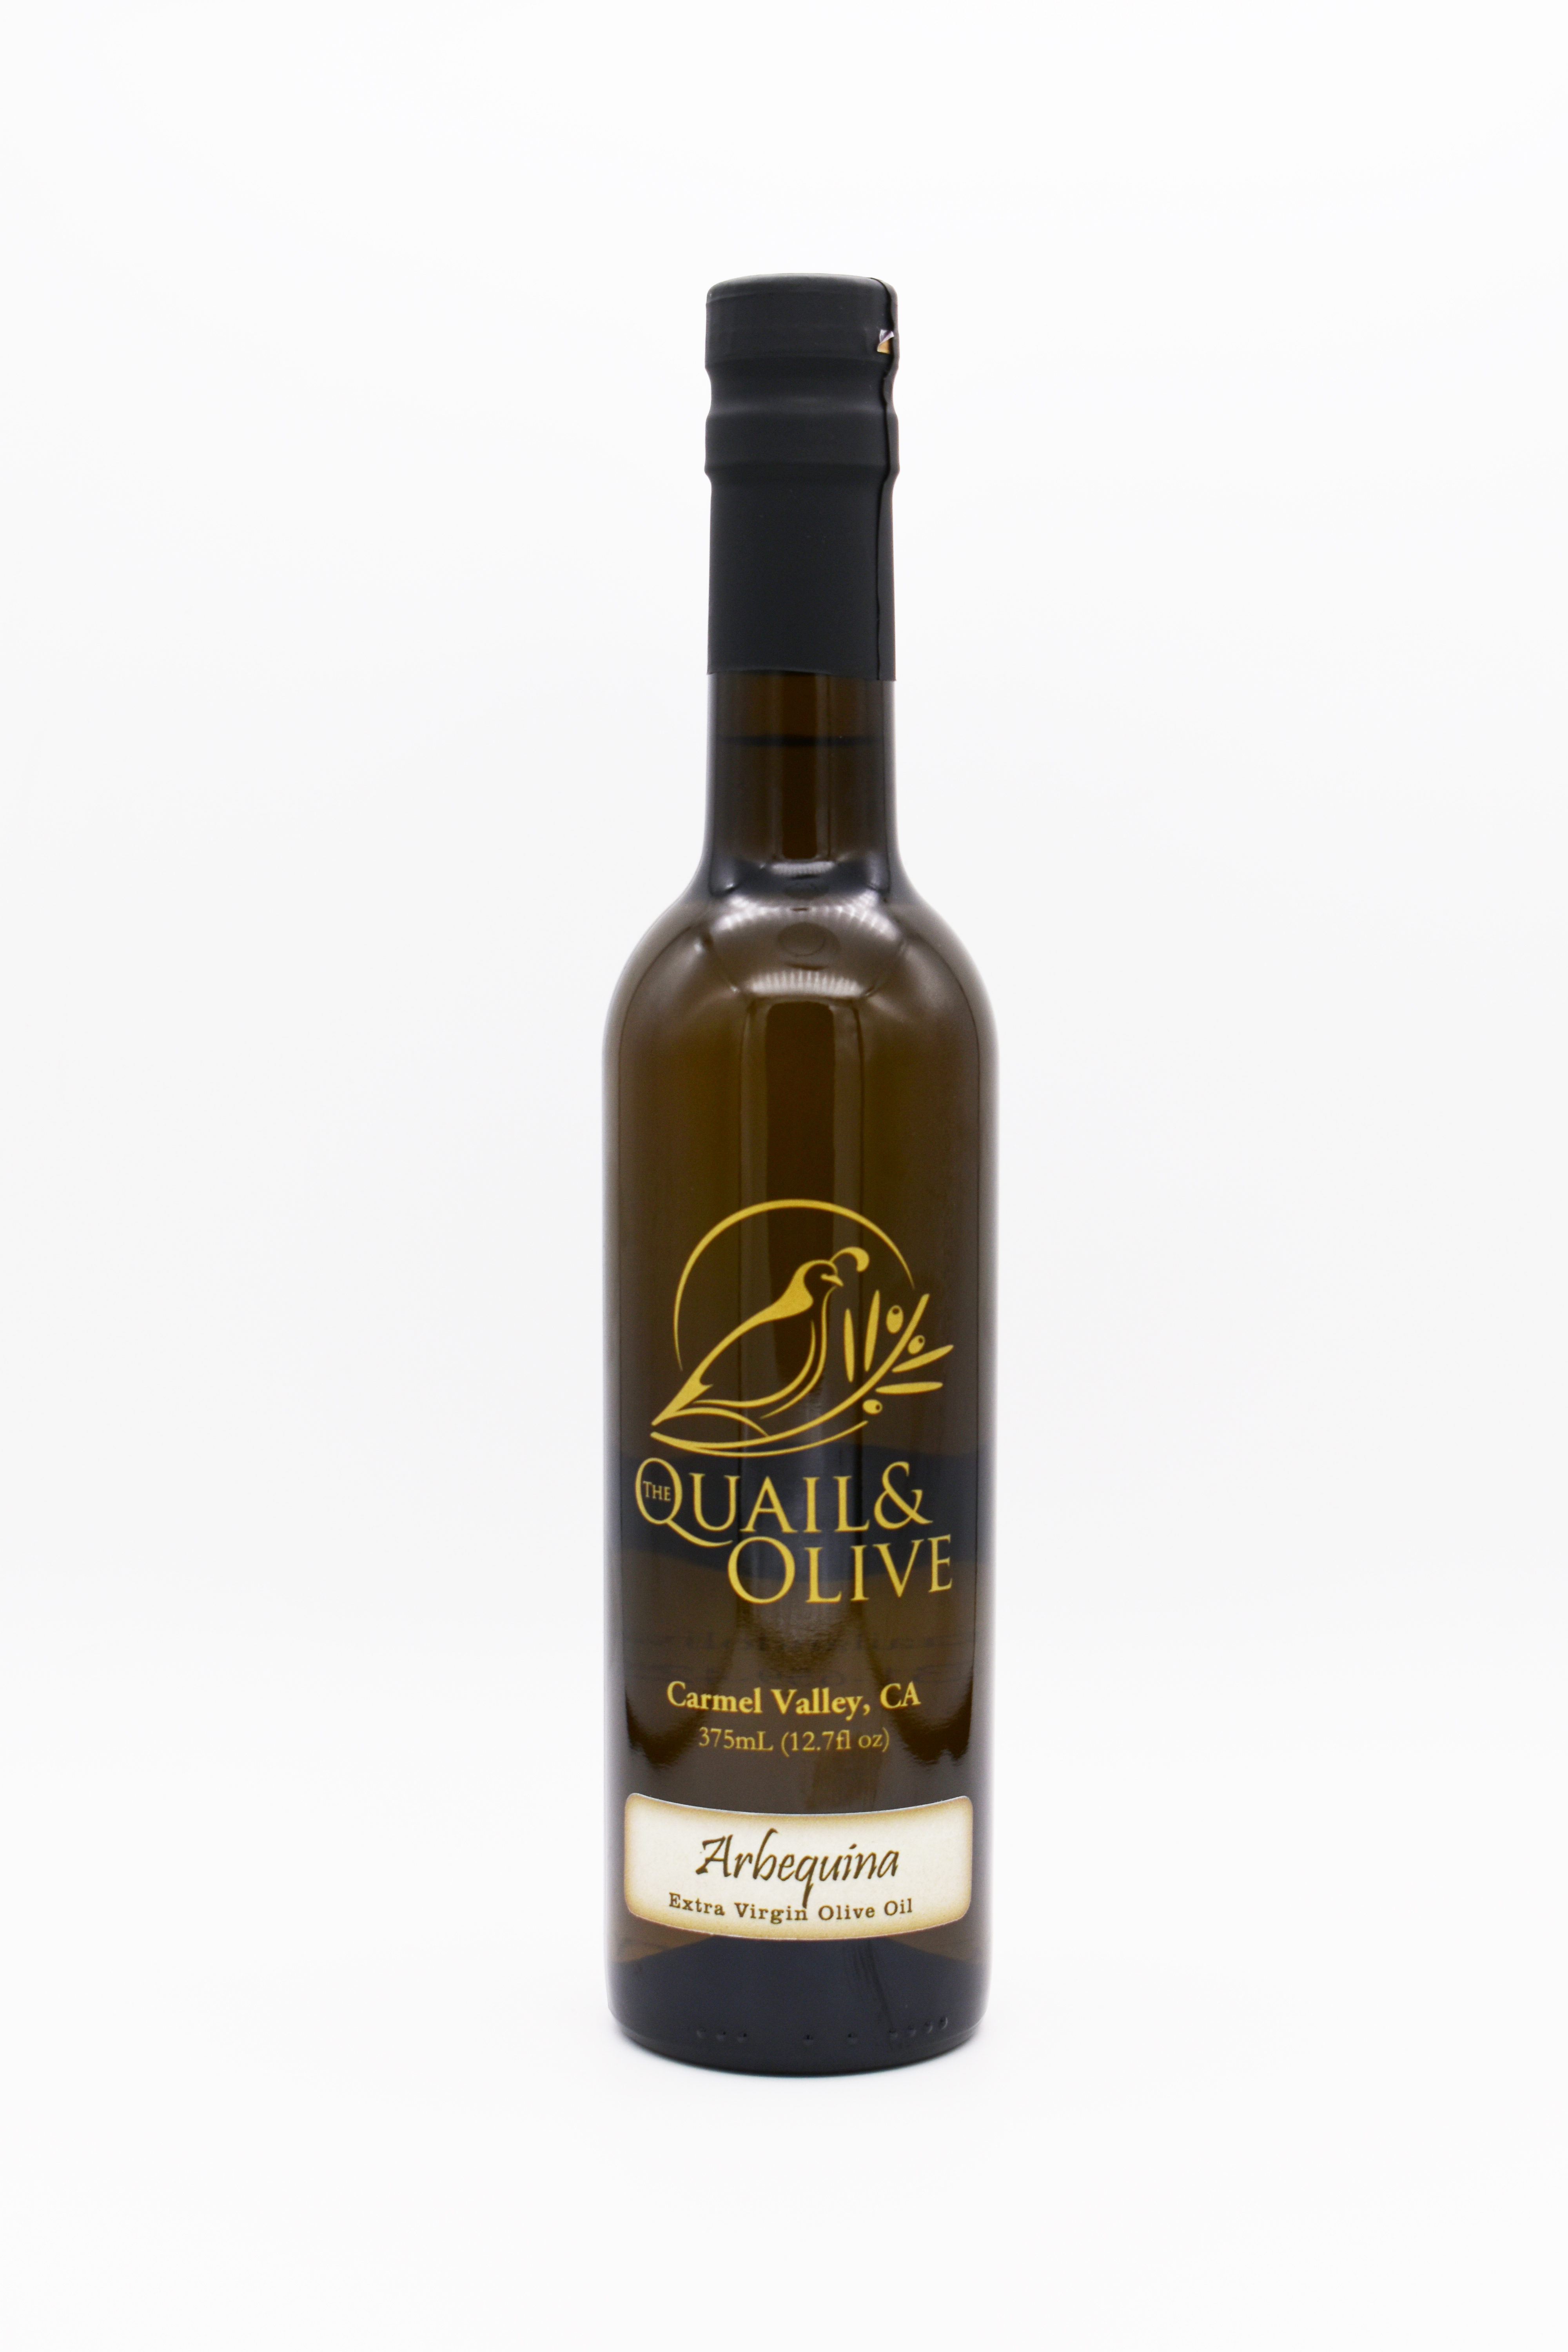 Product Image for Arbequina EVOO